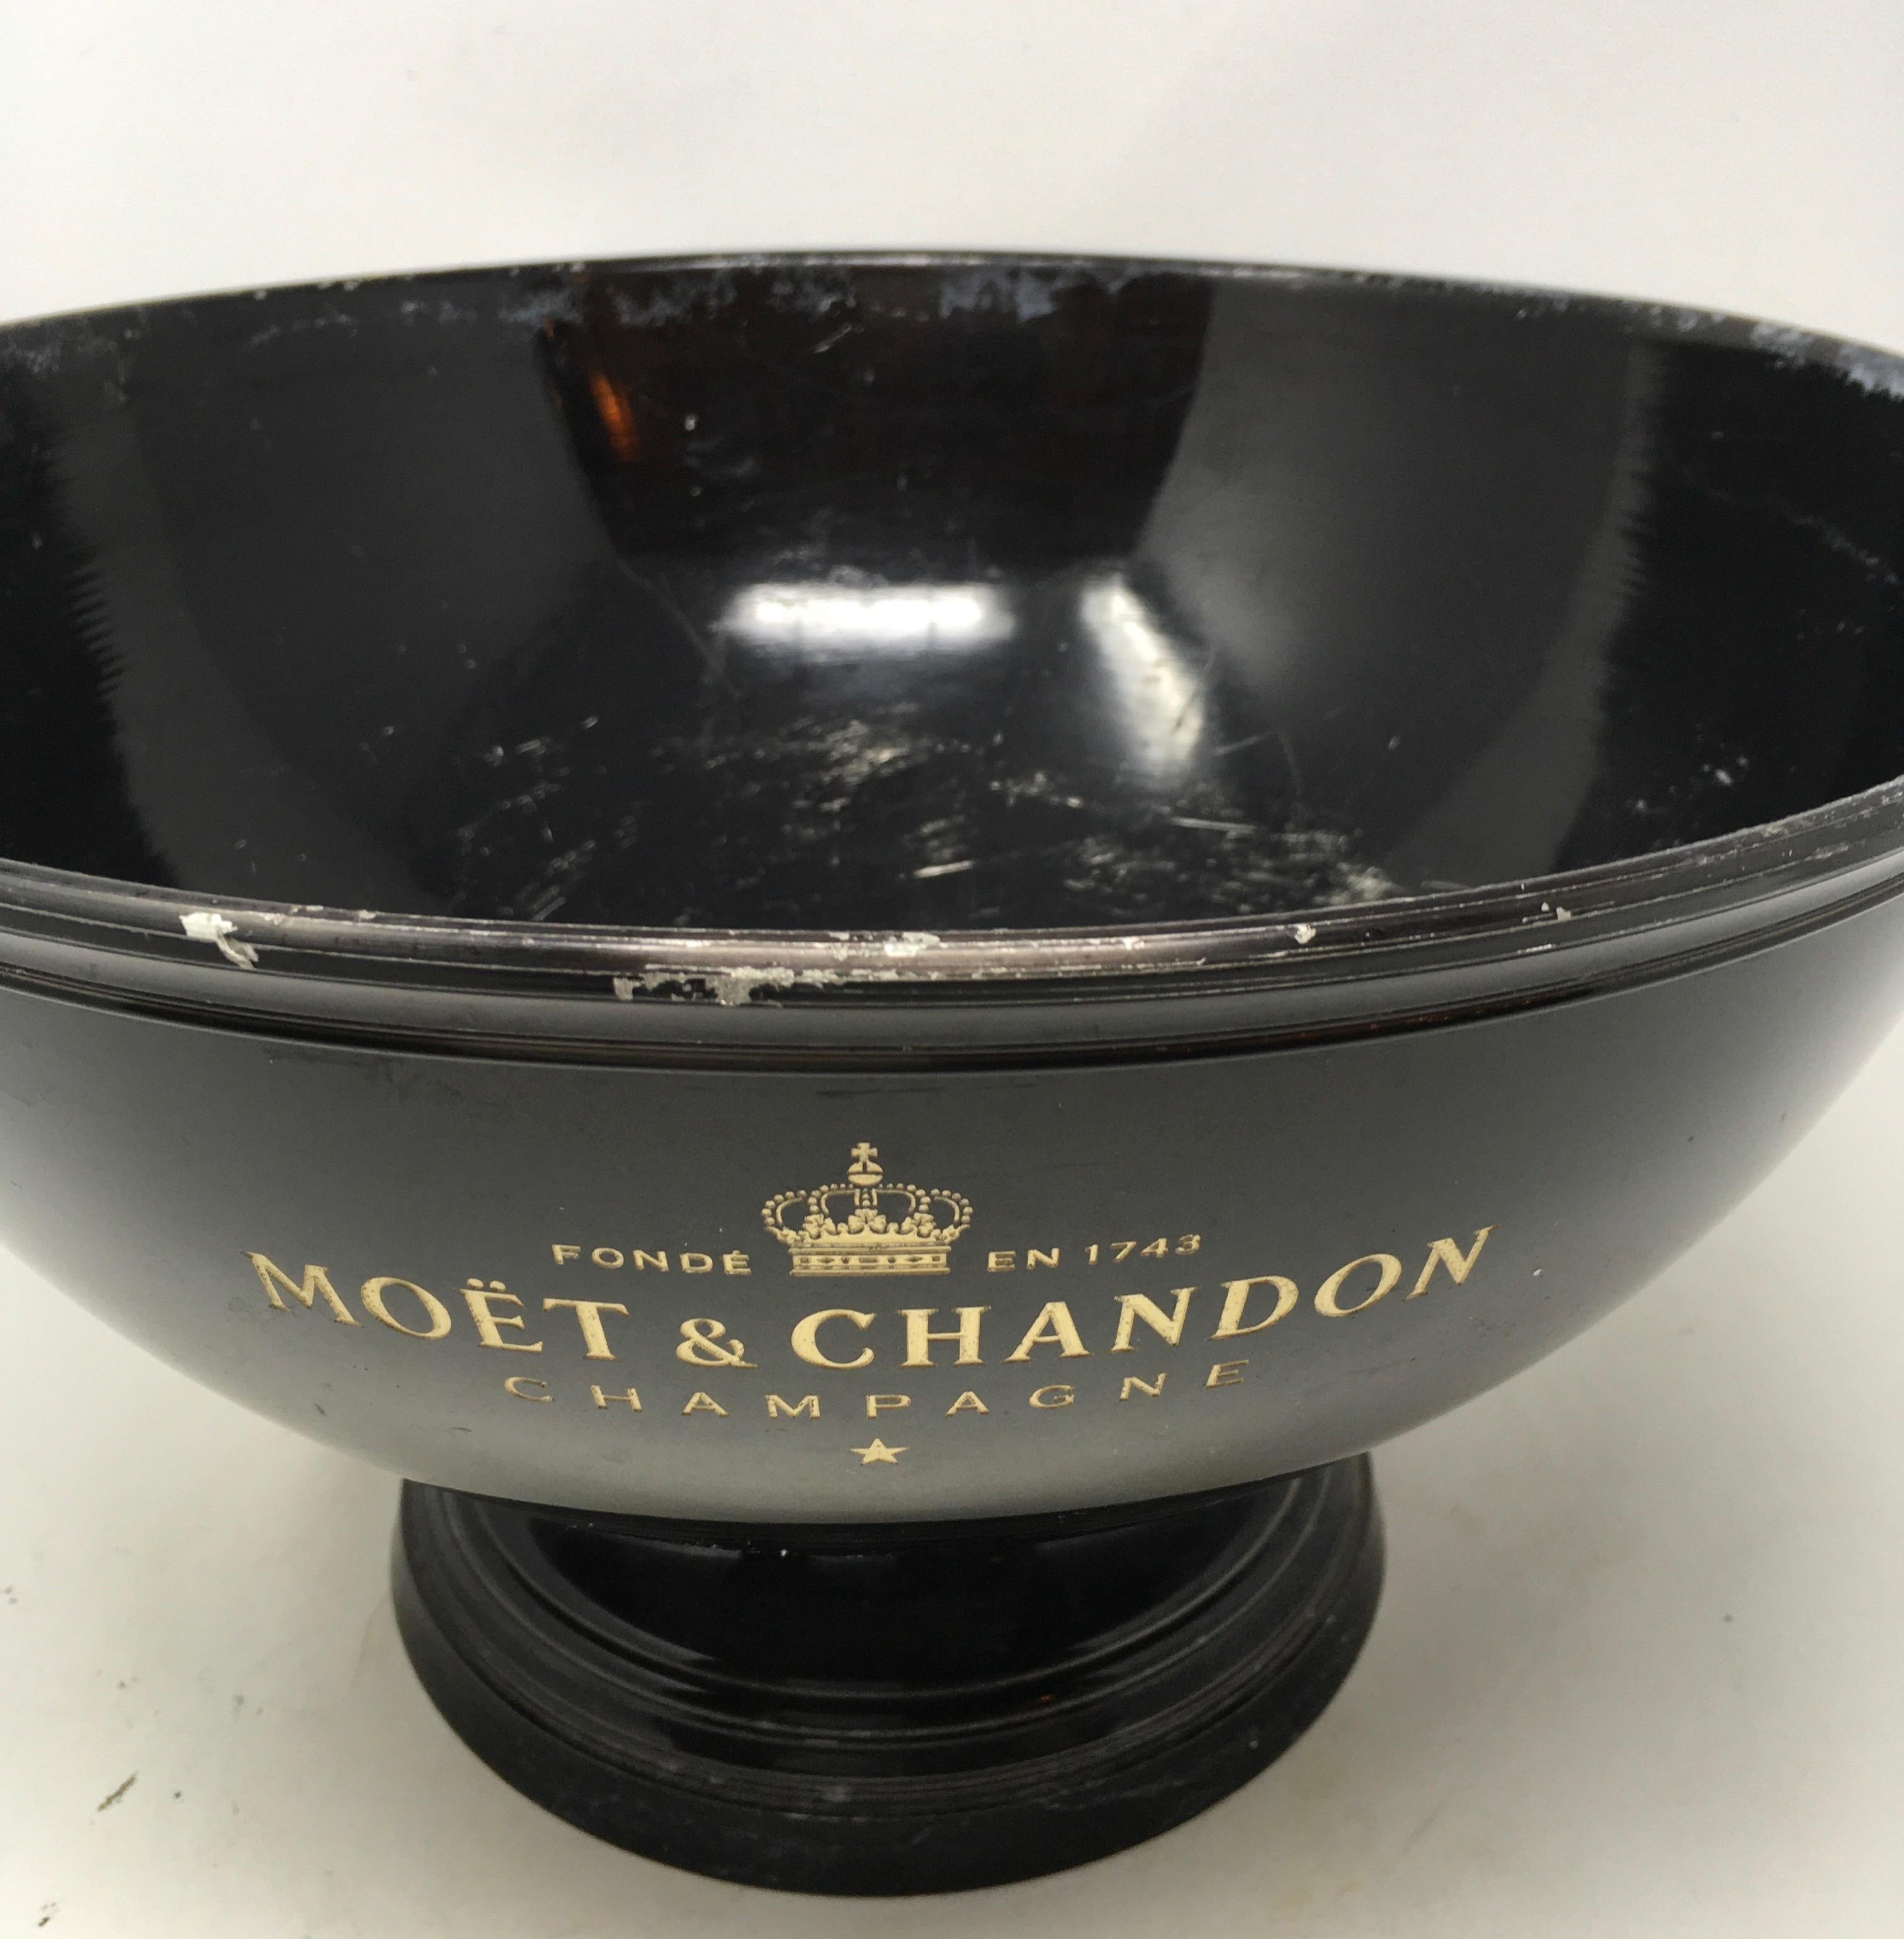 French Moet & Chandon multiple bottle champagne cooler. The cooler sits on a footed base and can accommodate 4-6 champagne bottles.

This piece weighs 8 lb.